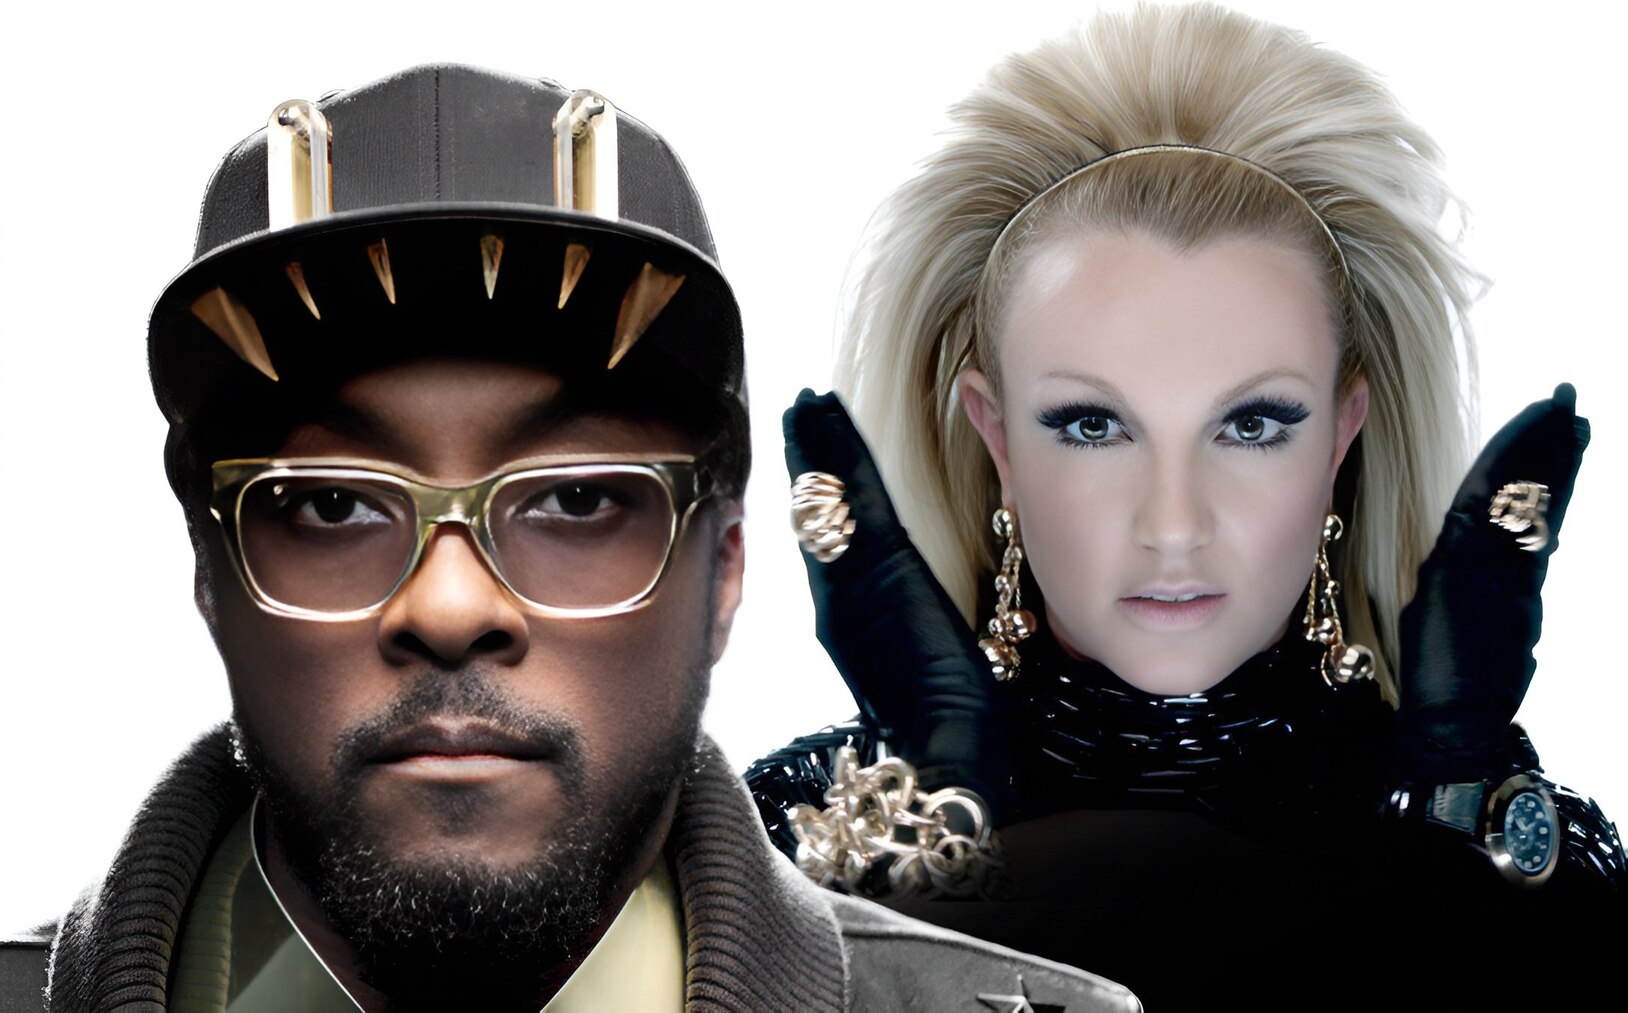 will.i.am et Britney Spears